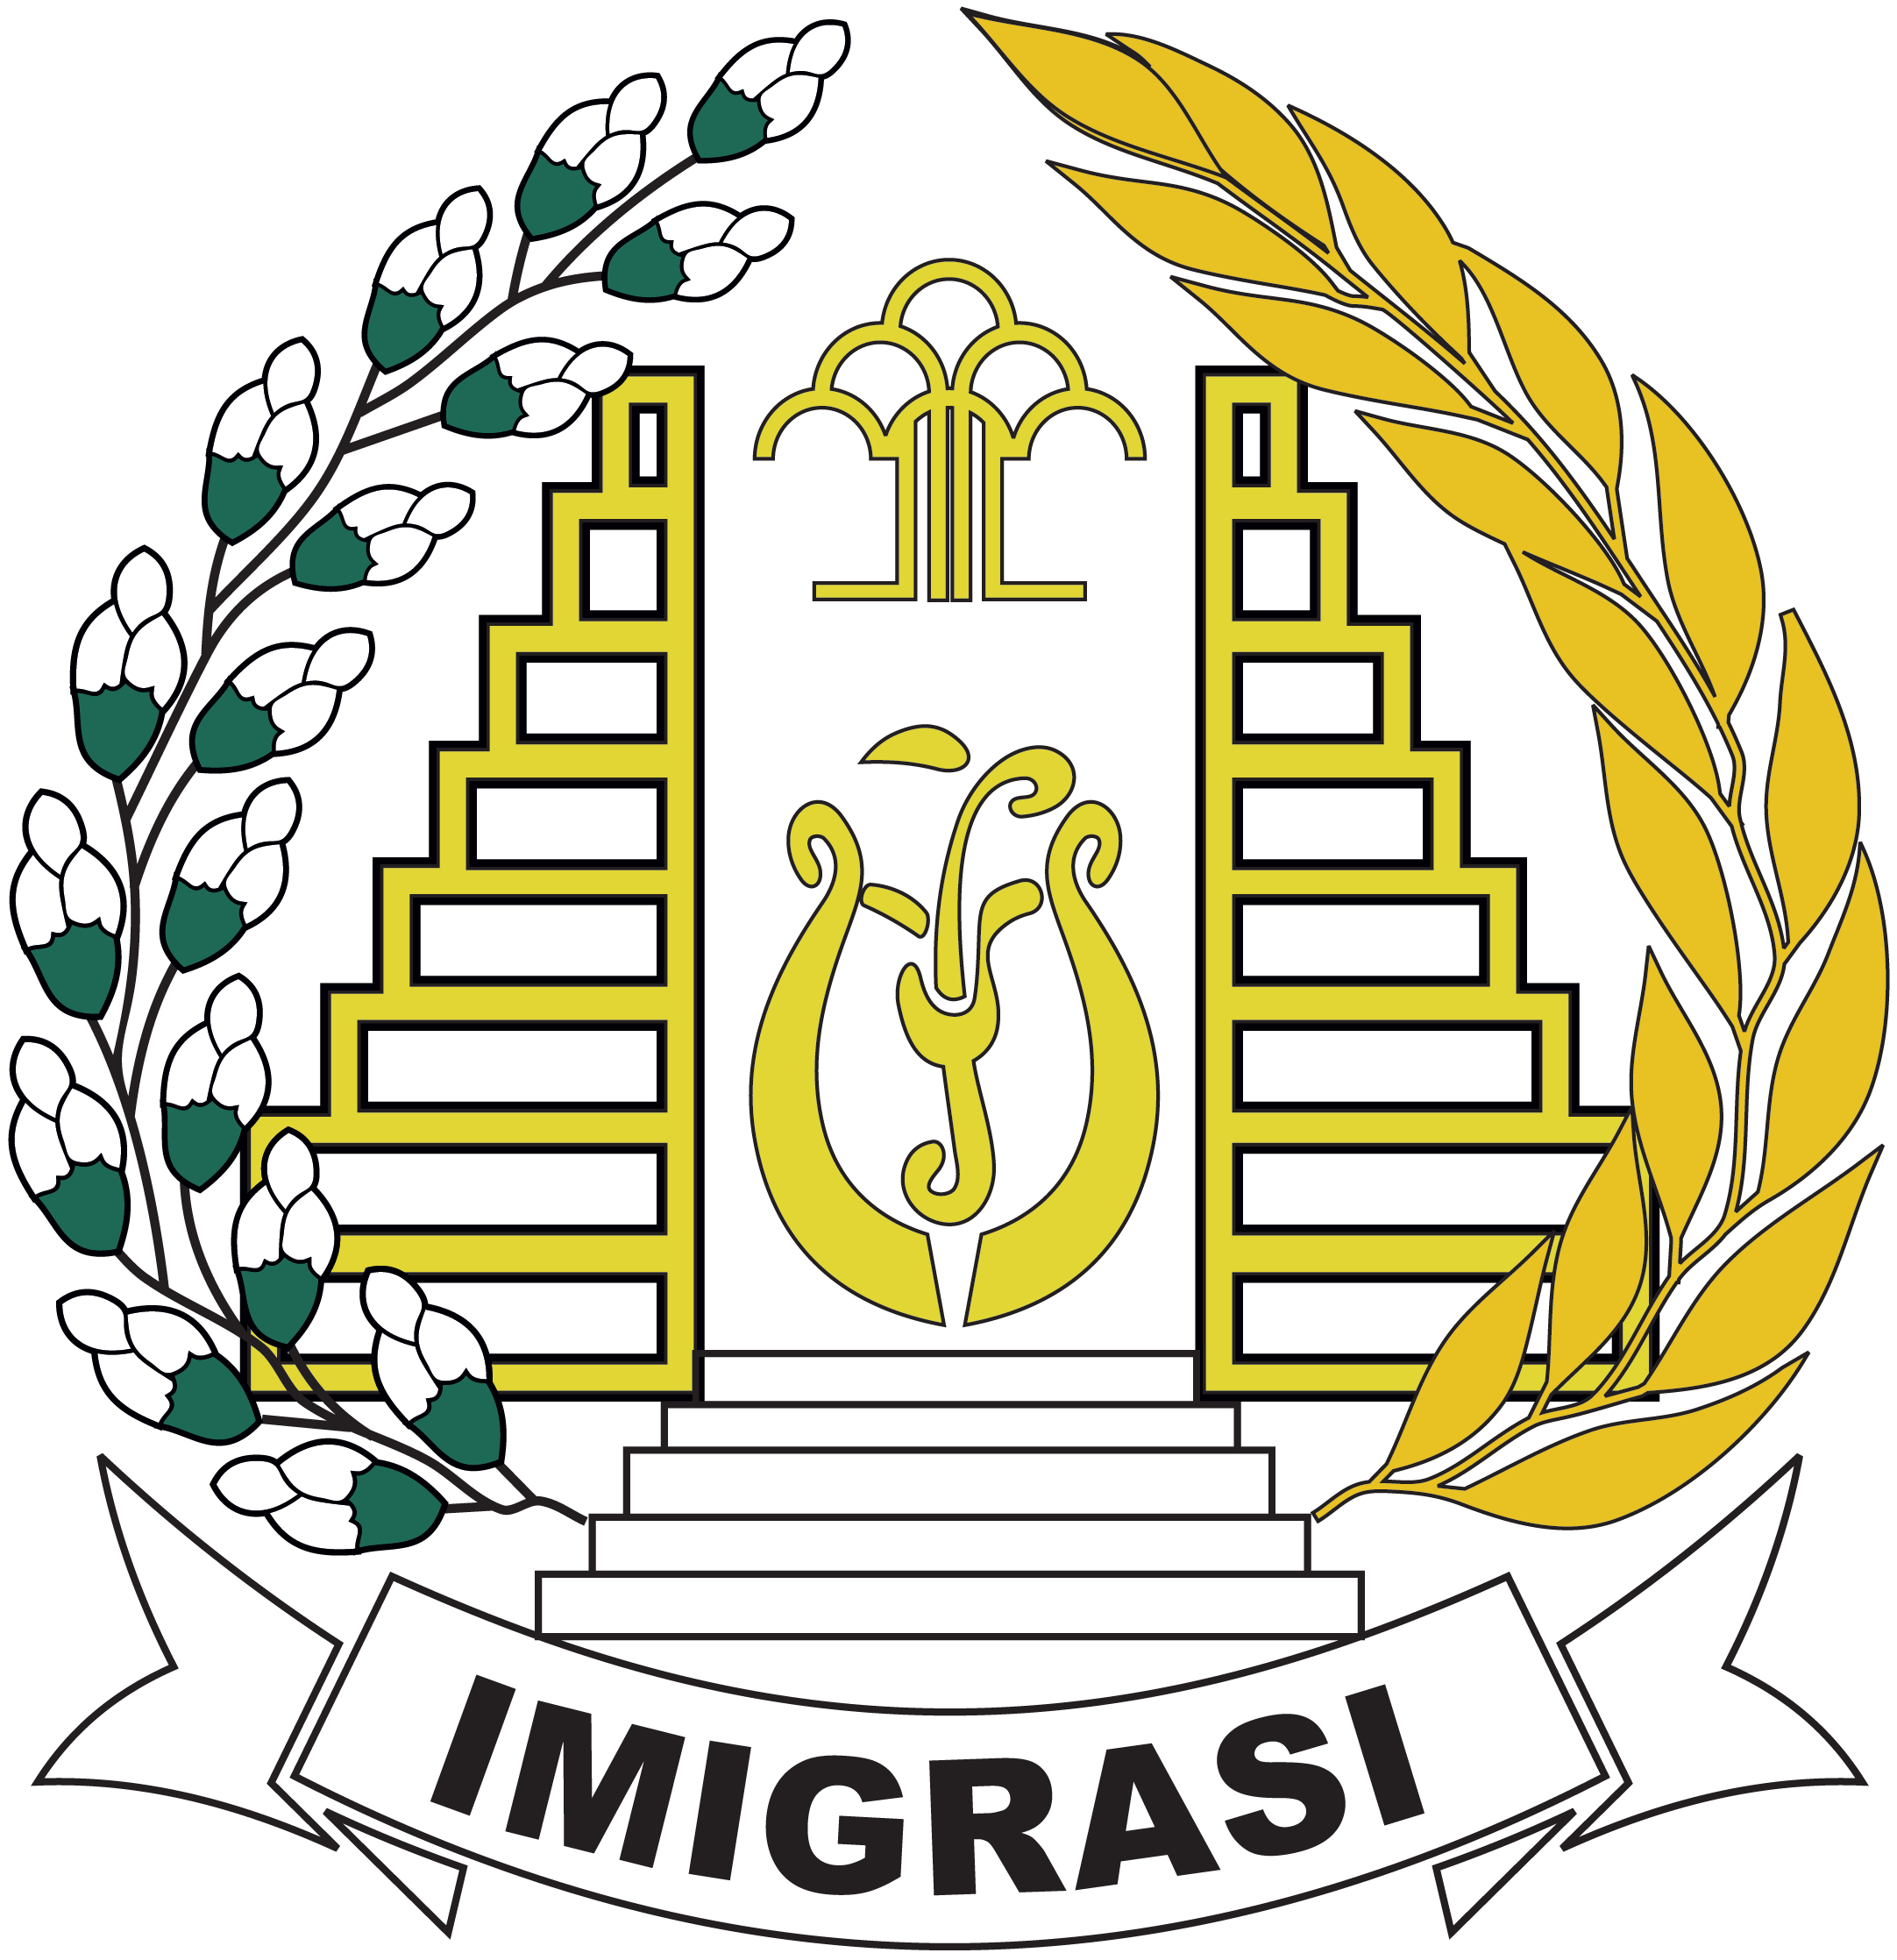 The Indonesian Immigration Office emblem